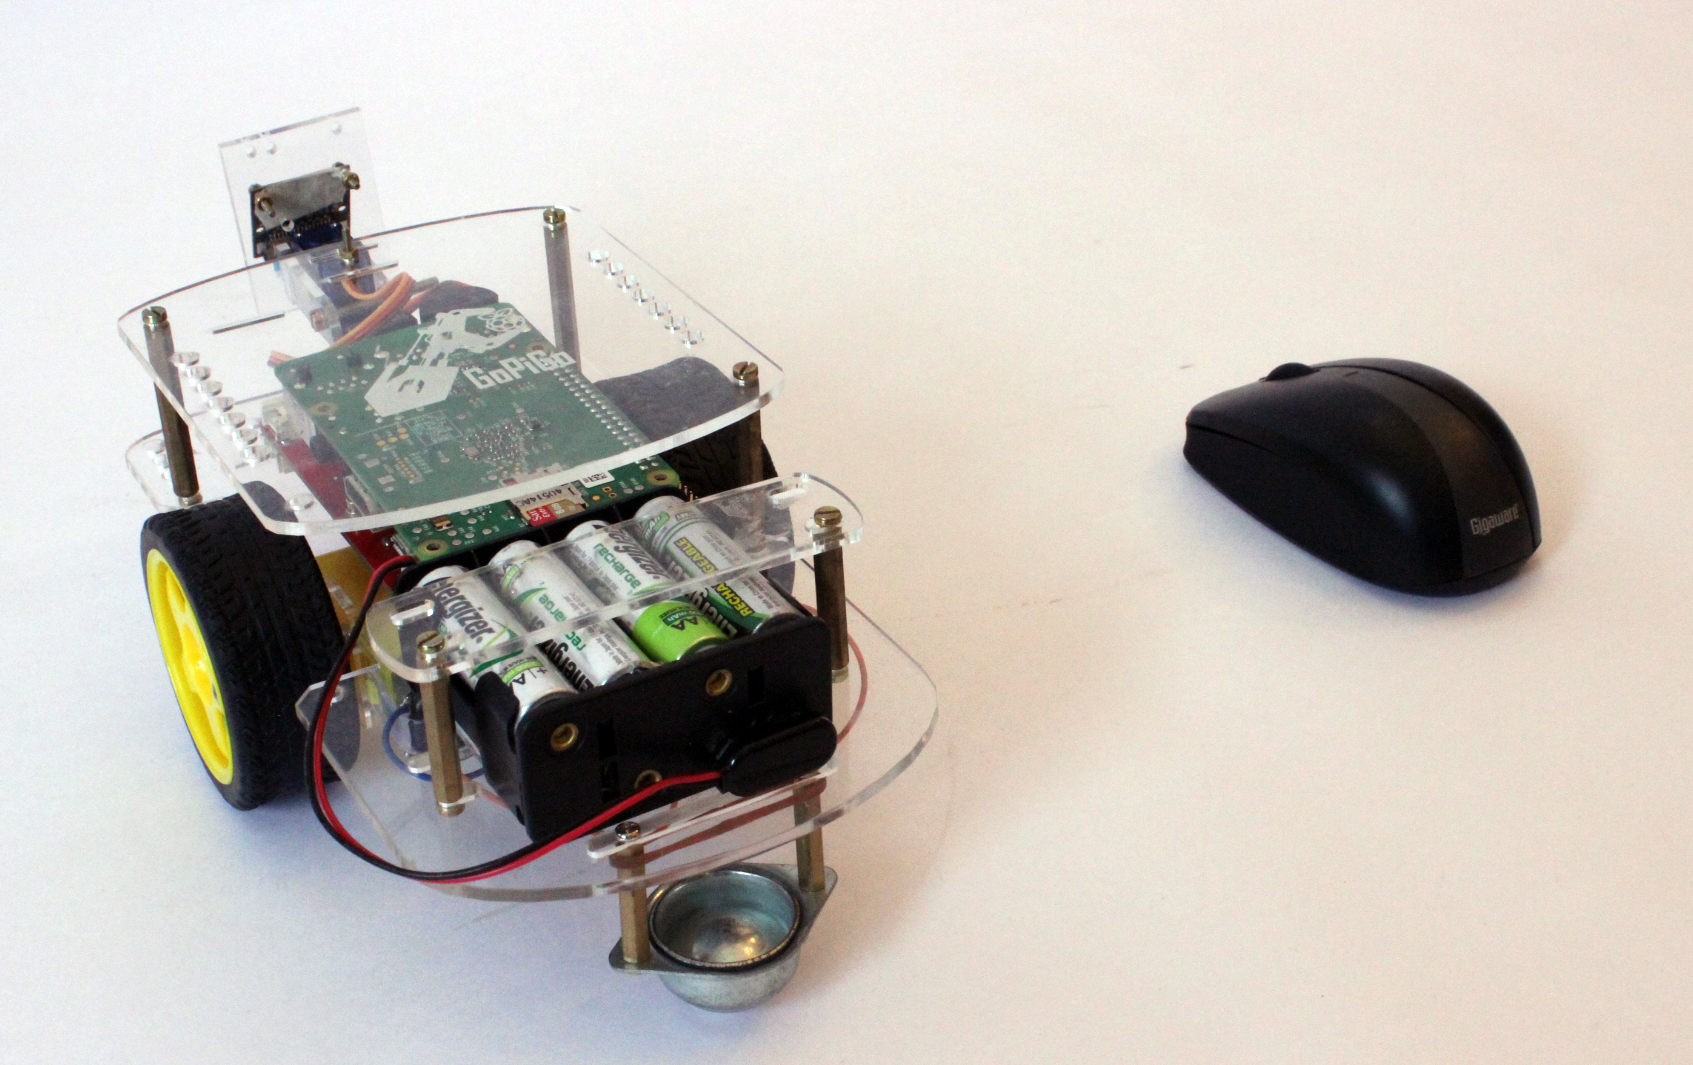 Mouse control of the Raspberry Pi Robot